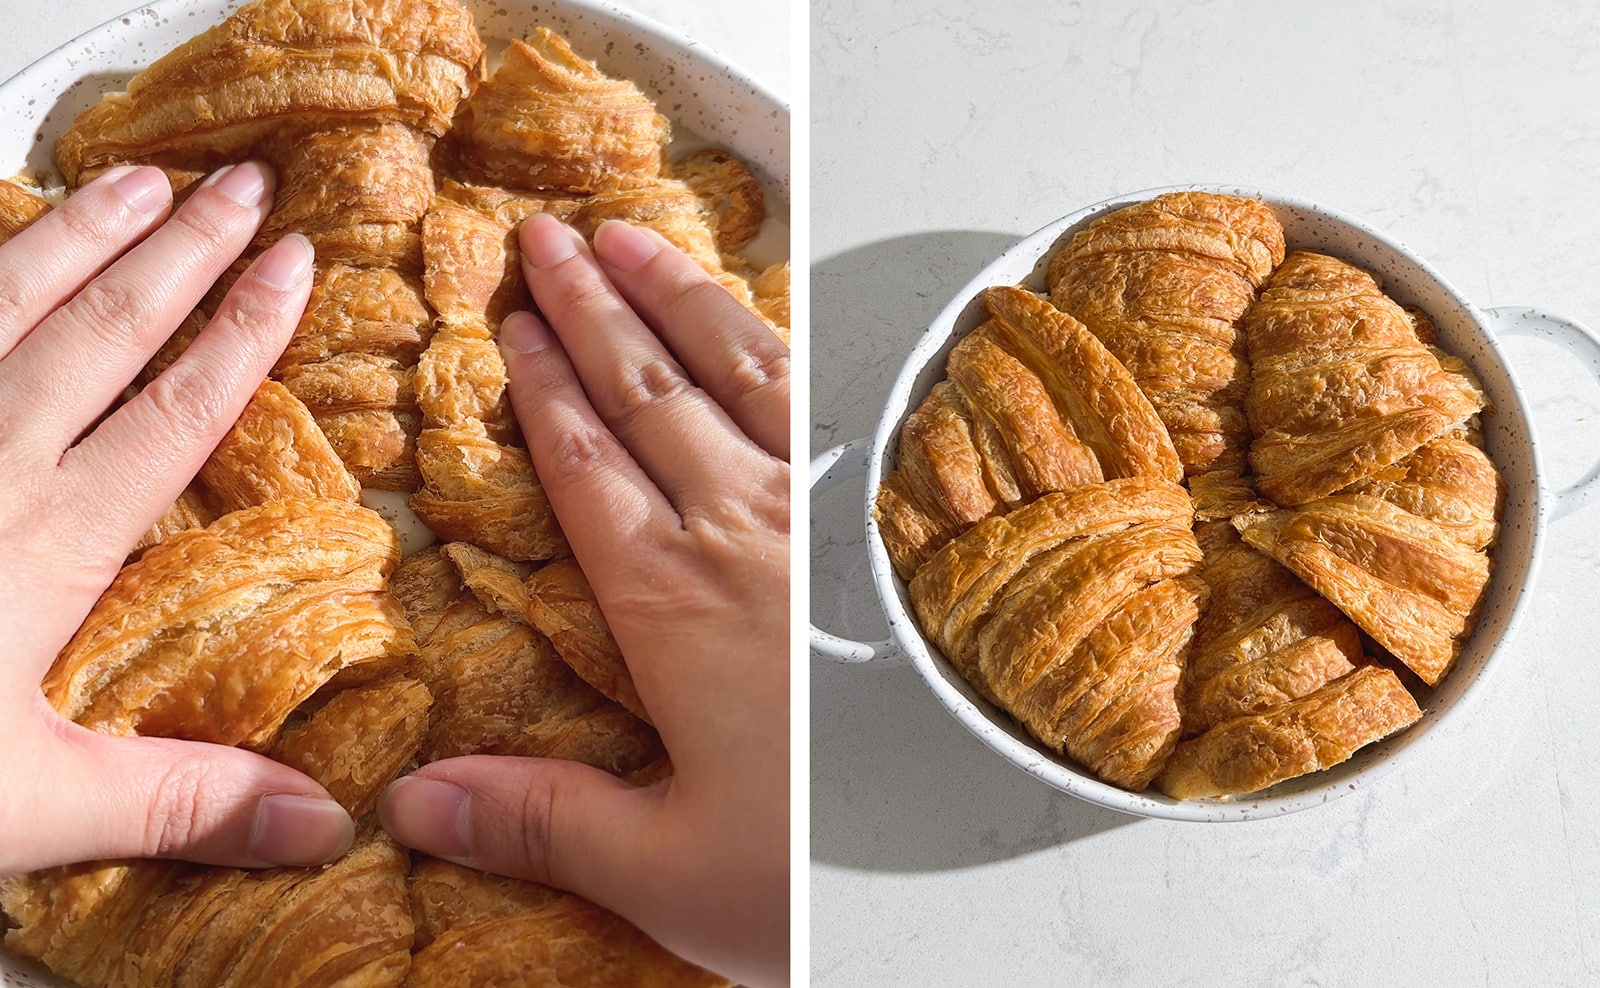 Left to right: two hands pressing croissants down into liquid, croissants arranged in baking dish.